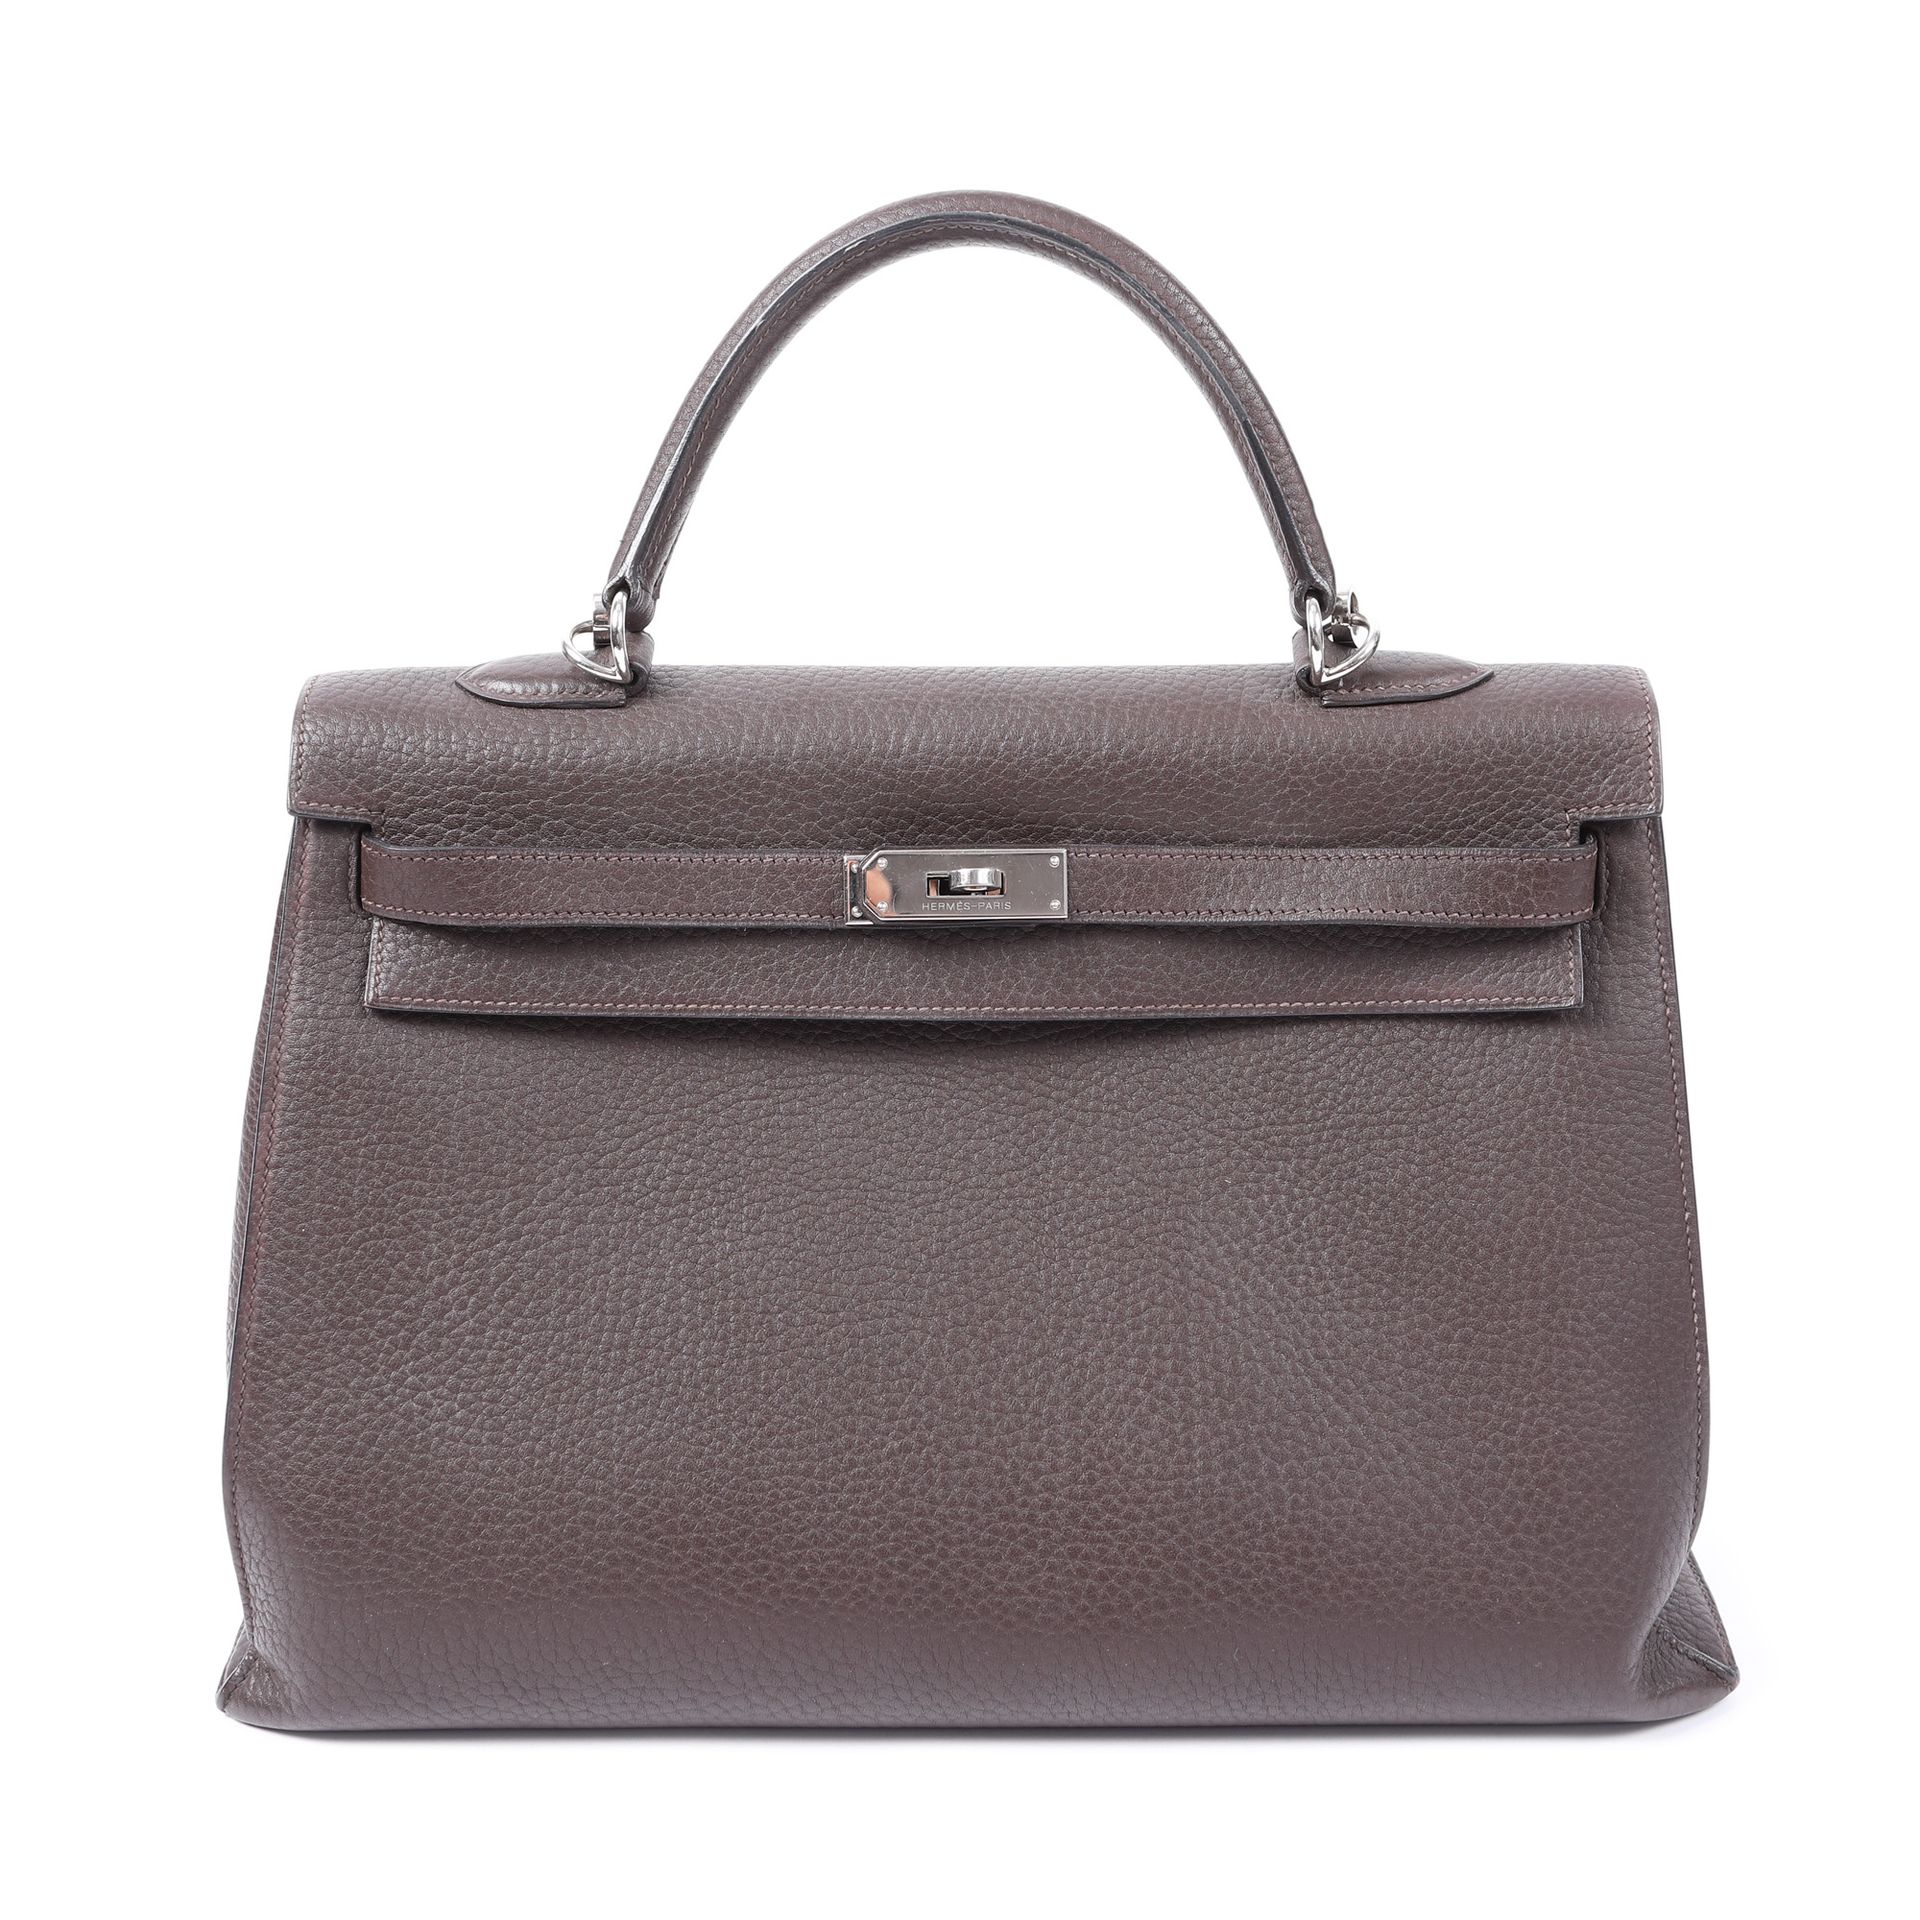 Hermes Kelly 35 bag, Togo leather, Chocolate Brown colour Togo leather; palladiu&hellip;